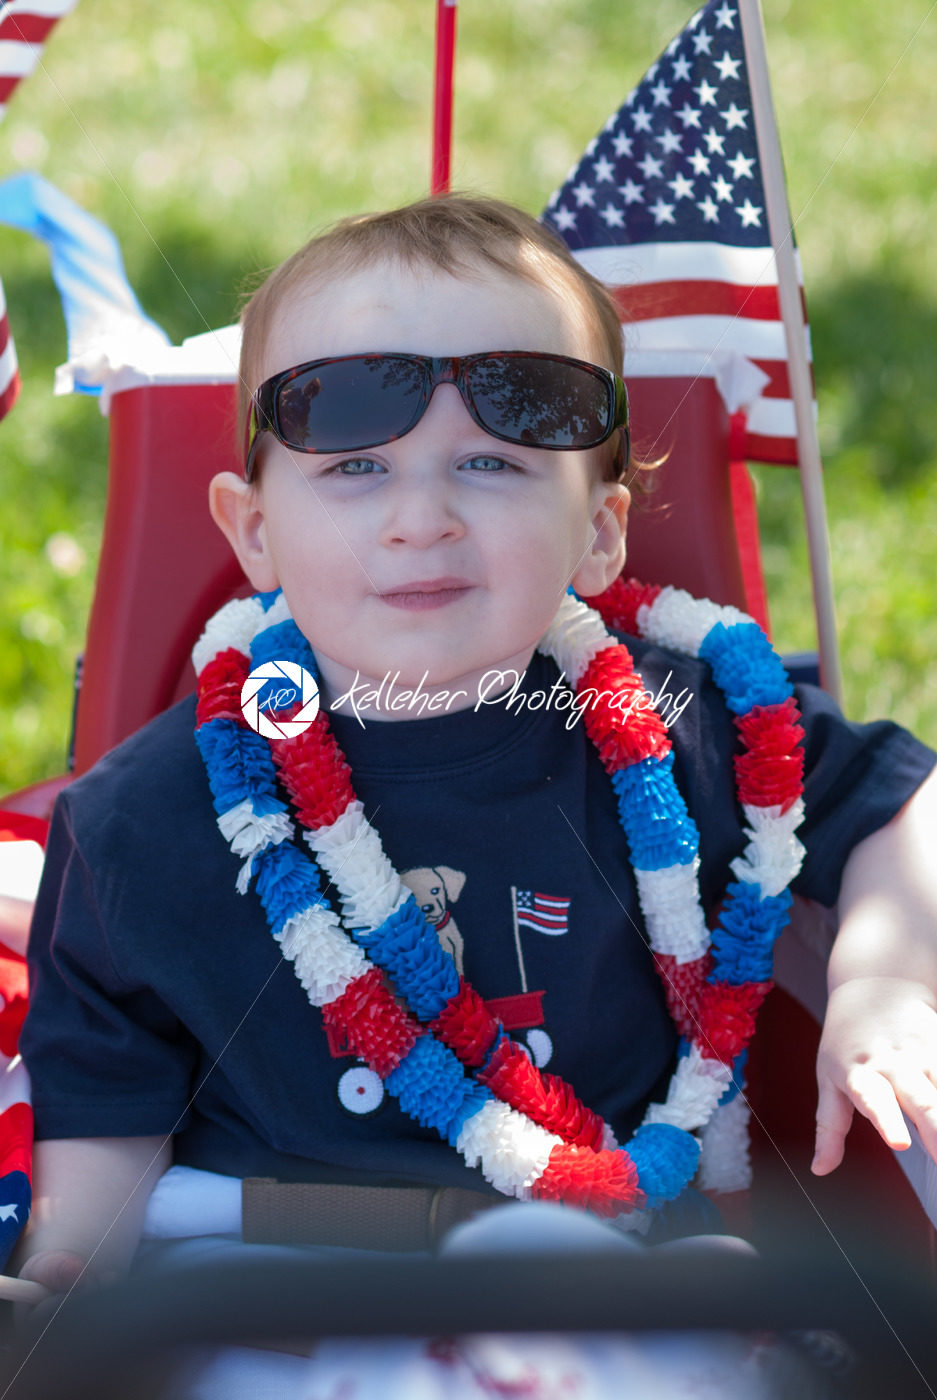 Young boy riding in red wagon having fun in the park for July Fourth - Kelleher Photography Store